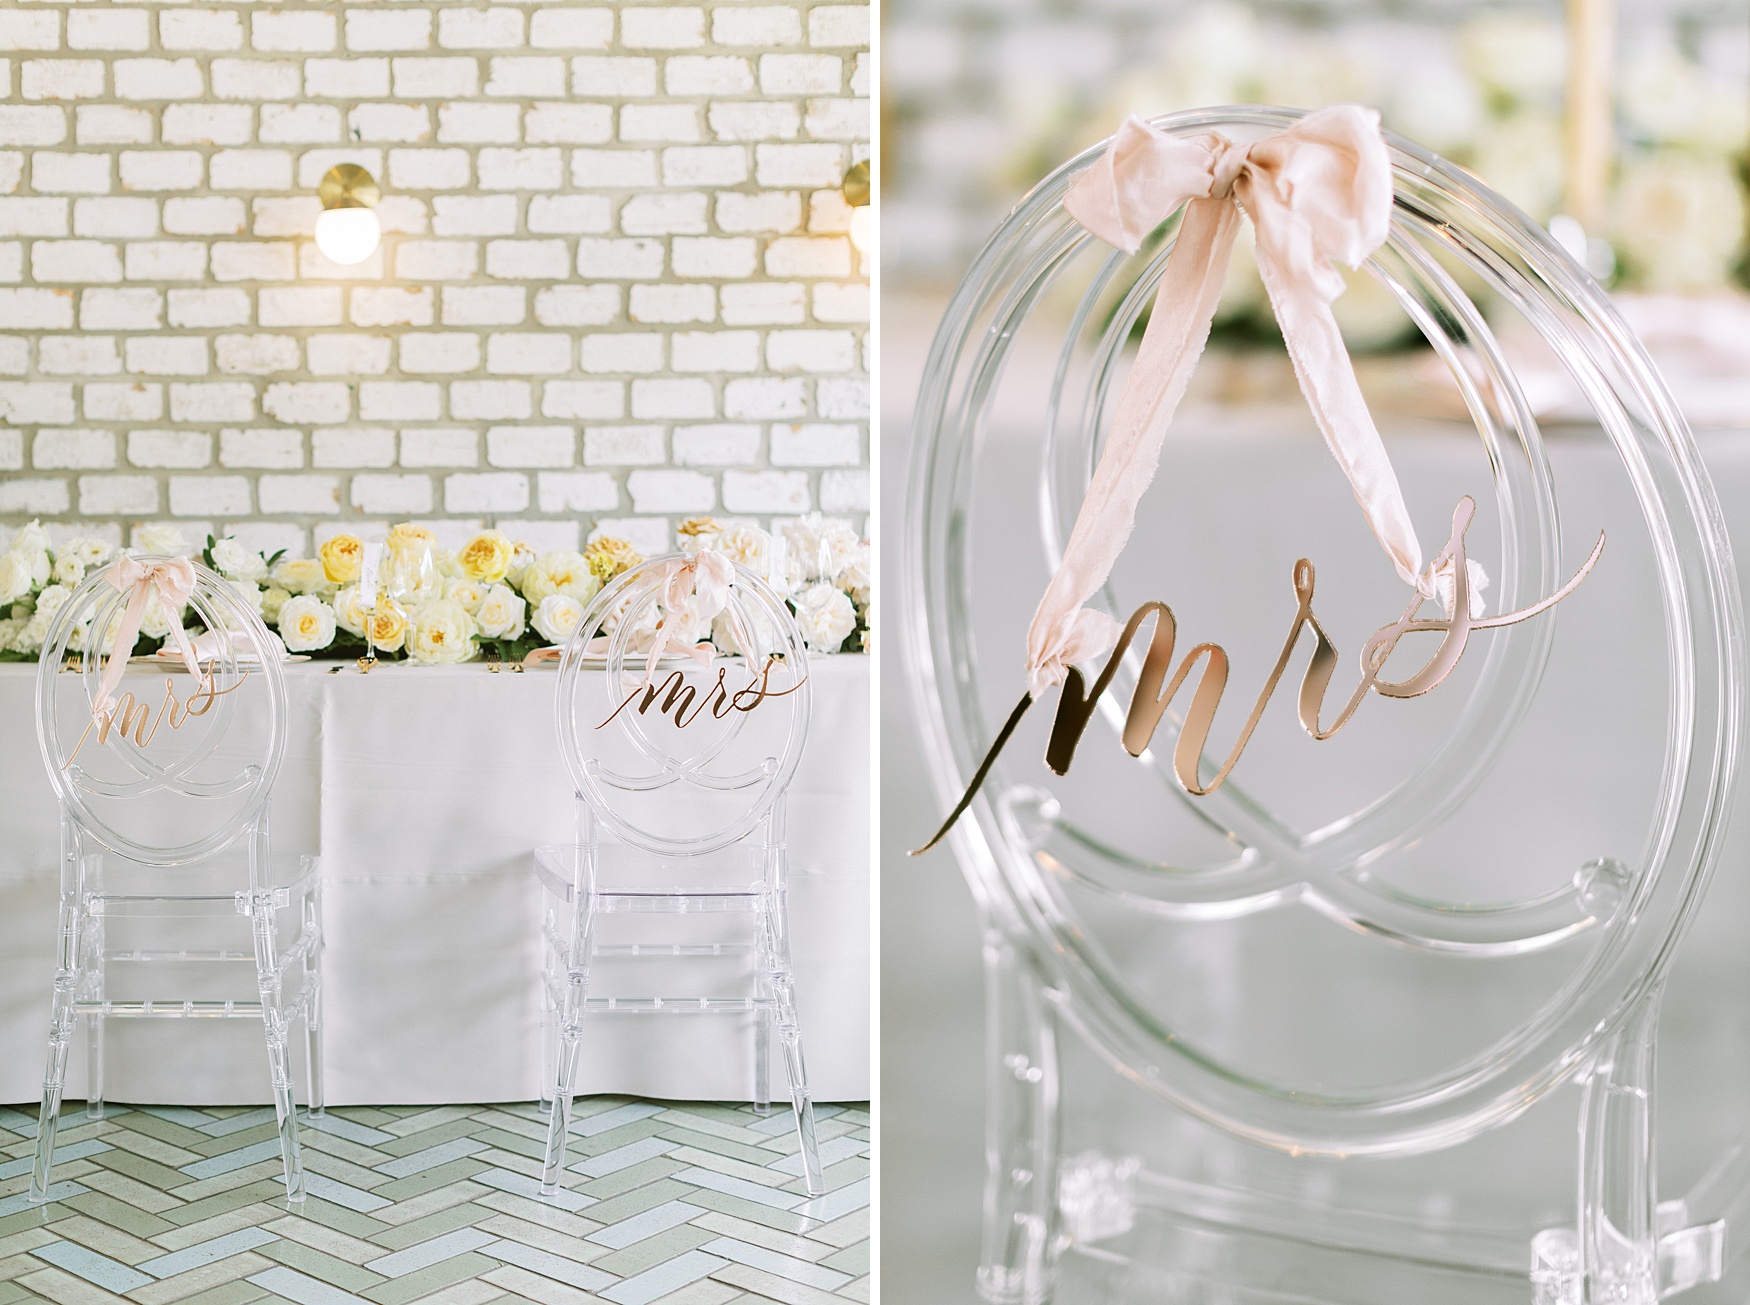 mrs and mrs acrylic name tags